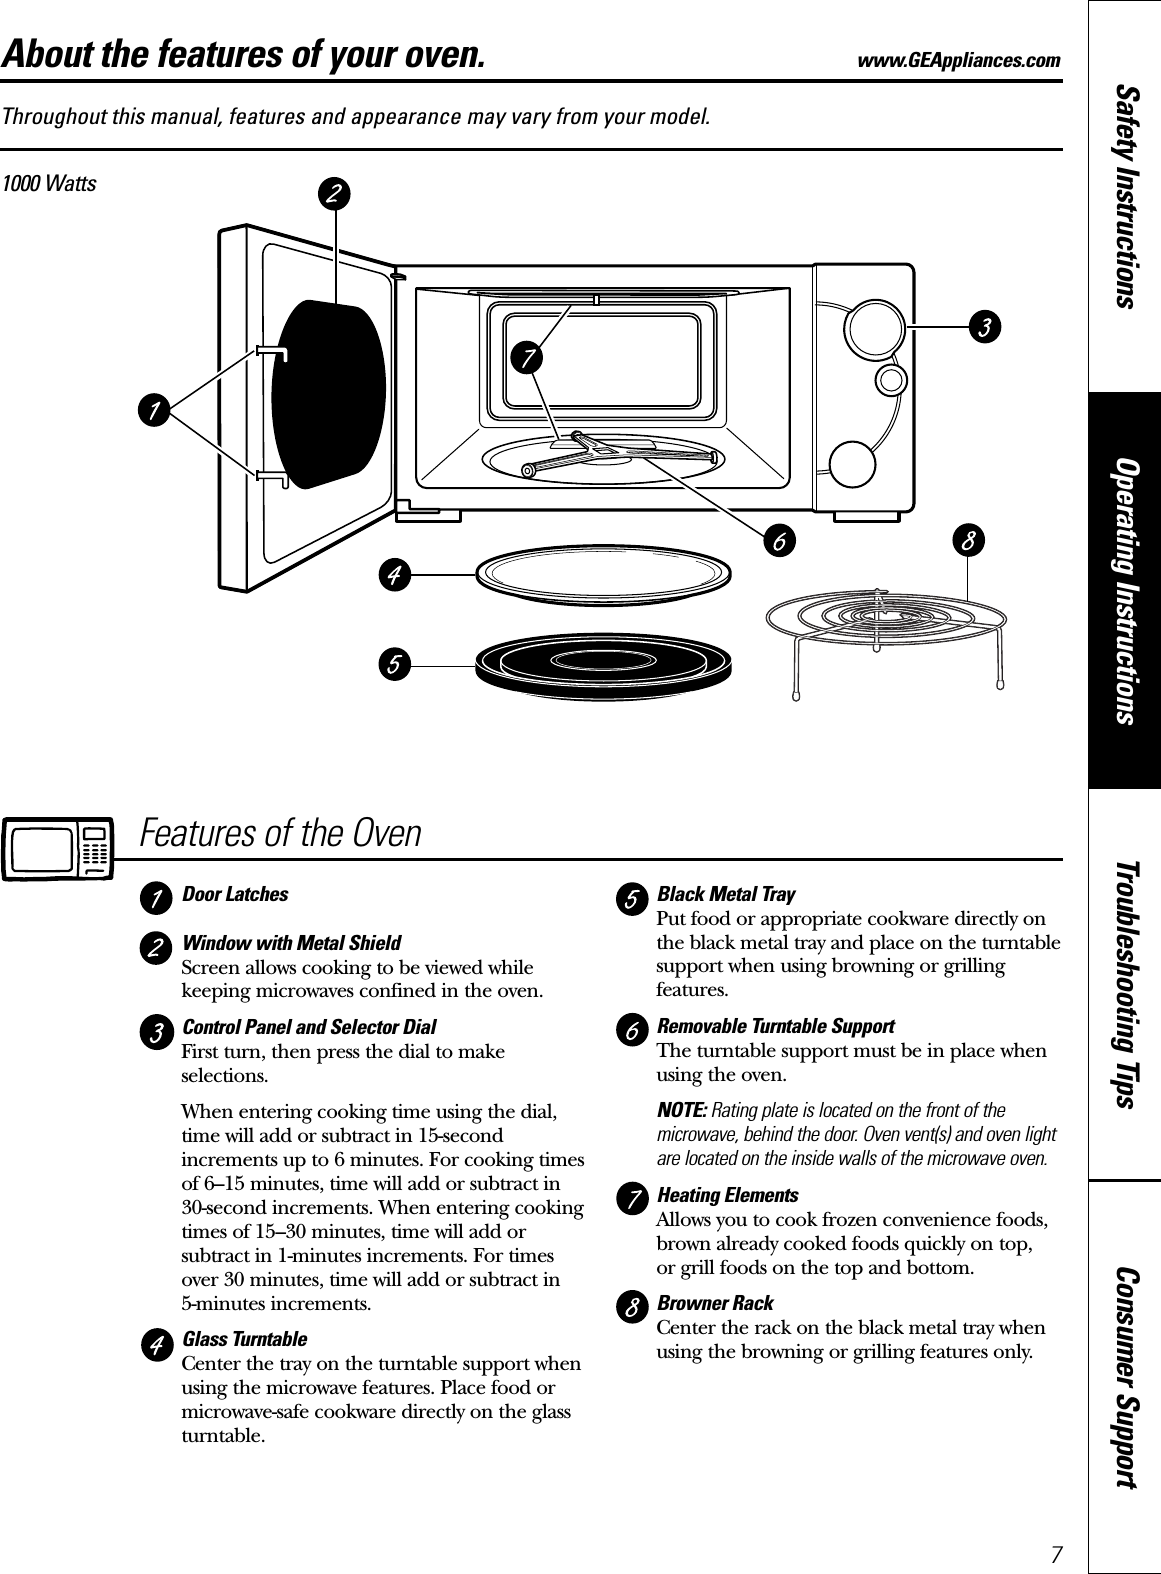 7Consumer SupportTroubleshooting TipsOperating InstructionsSafety InstructionsThroughout this manual, features and appearance may vary from your model.1000 WattsFeatures of the OvenDoor LatchesWindow with Metal ShieldScreen allows cooking to be viewed whilekeeping microwaves confined in the oven.Control Panel and Selector Dial First turn, then press the dial to makeselections. When entering cooking time using the dial,time will add or subtract in 15-secondincrements up to 6 minutes. For cooking timesof 6–15 minutes, time will add or subtract in30-second increments. When entering cookingtimes of 15–30 minutes, time will add orsubtract in 1-minutes increments. For timesover 30 minutes, time will add or subtract in 5-minutes increments.Glass TurntableCenter the tray on the turntable support whenusing the microwave features. Place food ormicrowave-safe cookware directly on the glassturntable.Black Metal Tray Put food or appropriate cookware directly onthe black metal tray and place on the turntablesupport when using browning or grillingfeatures.Removable Turntable Support The turntable support must be in place whenusing the oven.NOTE: Rating plate is located on the front of themicrowave, behind the door. Oven vent(s) and oven lightare located on the inside walls of the microwave oven.Heating Elements Allows you to cook frozen convenience foods,brown already cooked foods quickly on top, or grill foods on the top and bottom.Browner Rack Center the rack on the black metal tray whenusing the browning or grilling features only.About the features of your oven. www.GEAppliances.com